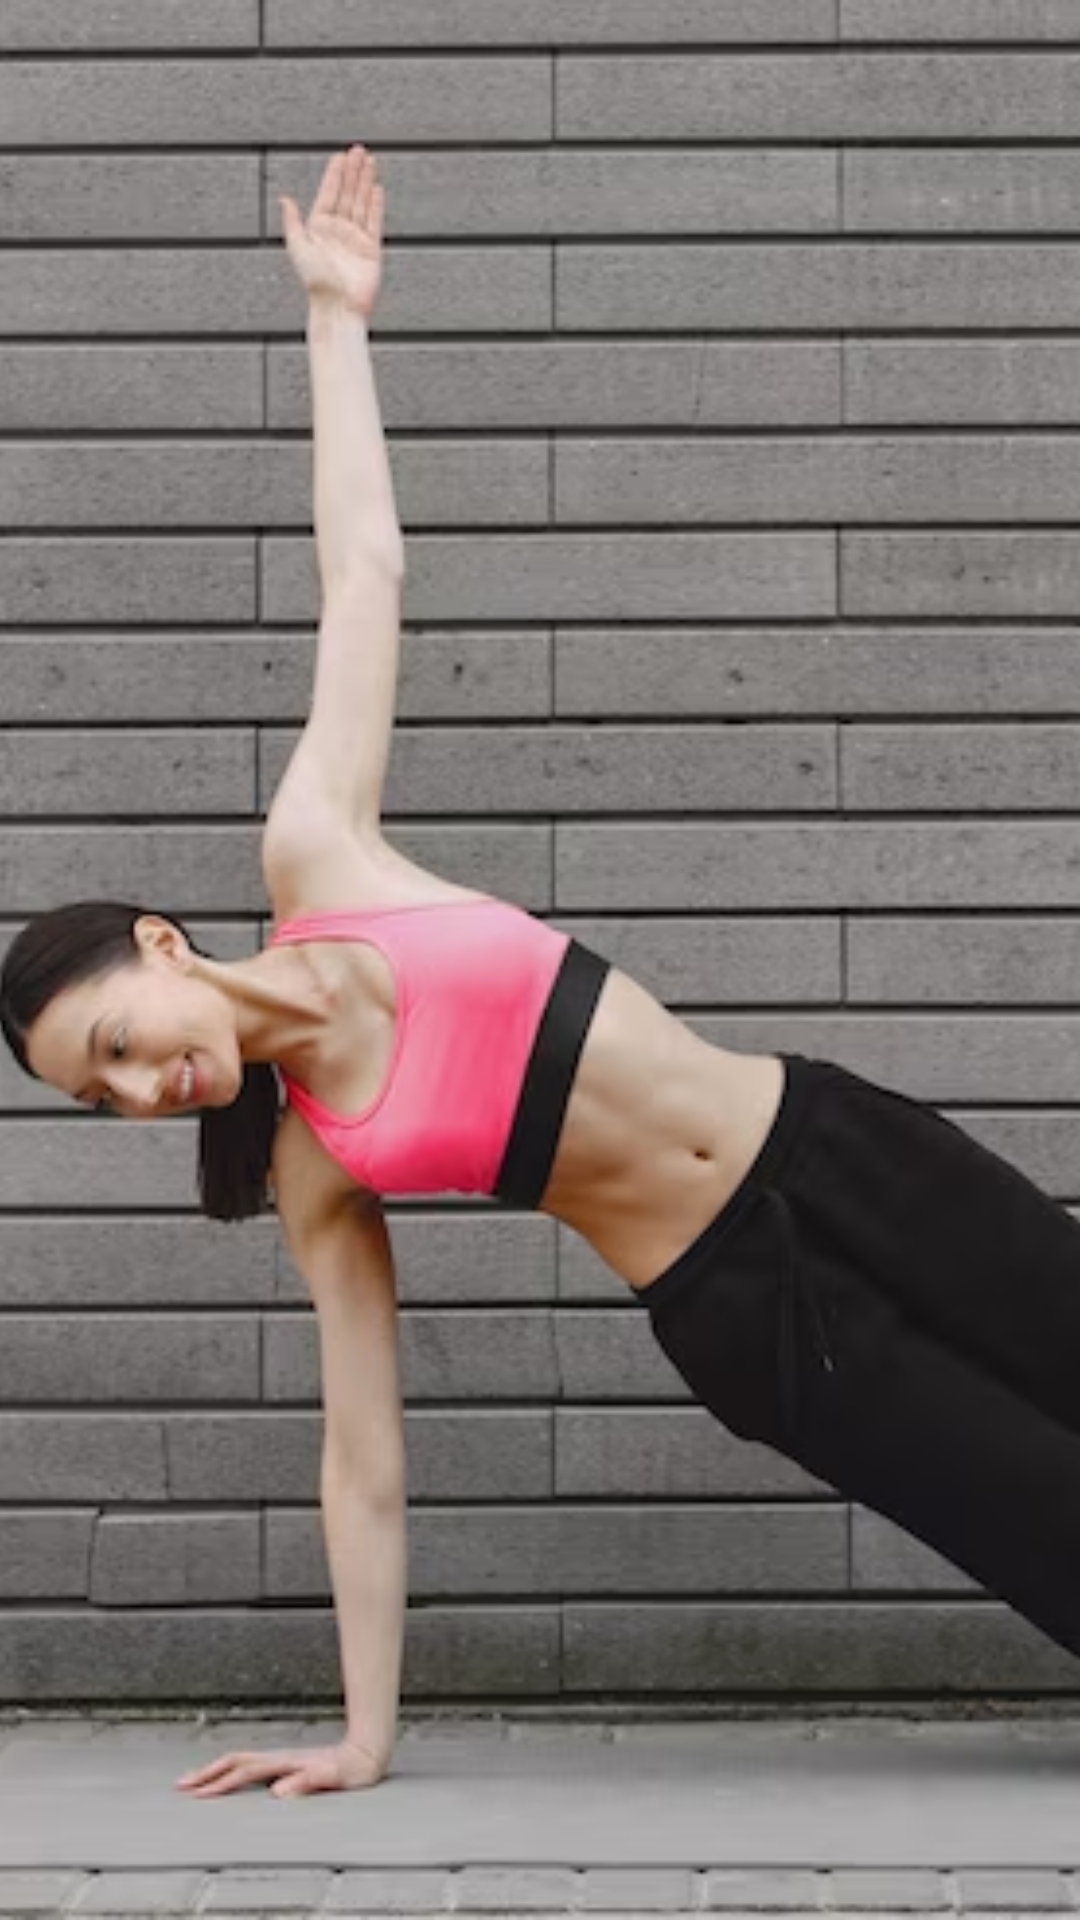 10 Exercises you can do at home even without equipment